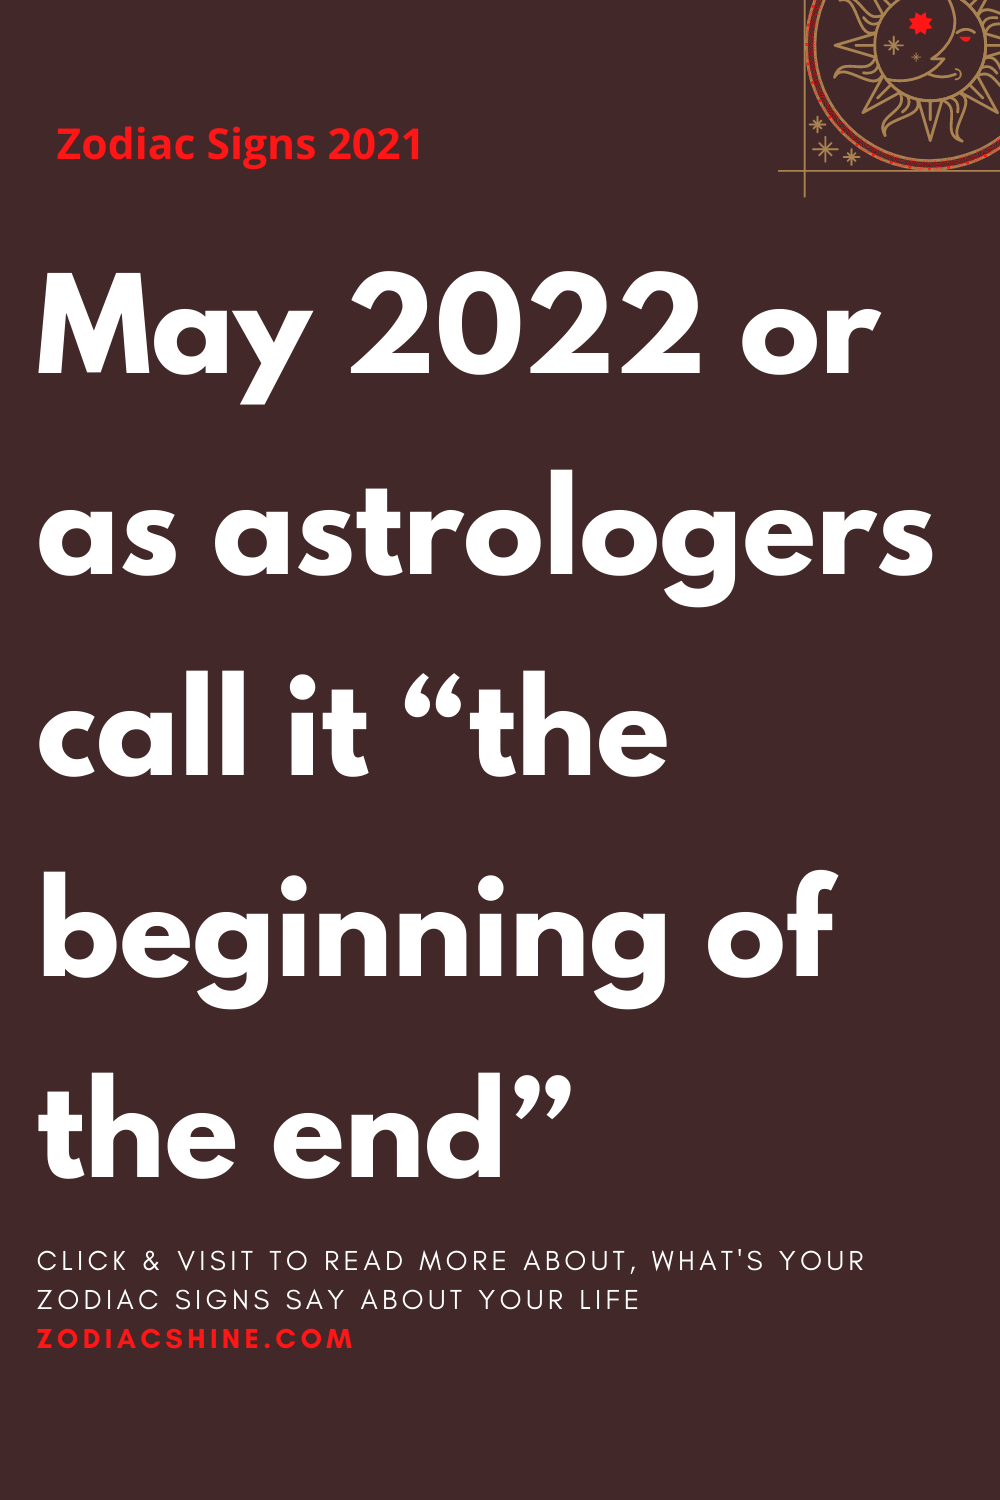 May 2022 or as astrologers call it “the beginning of the end”